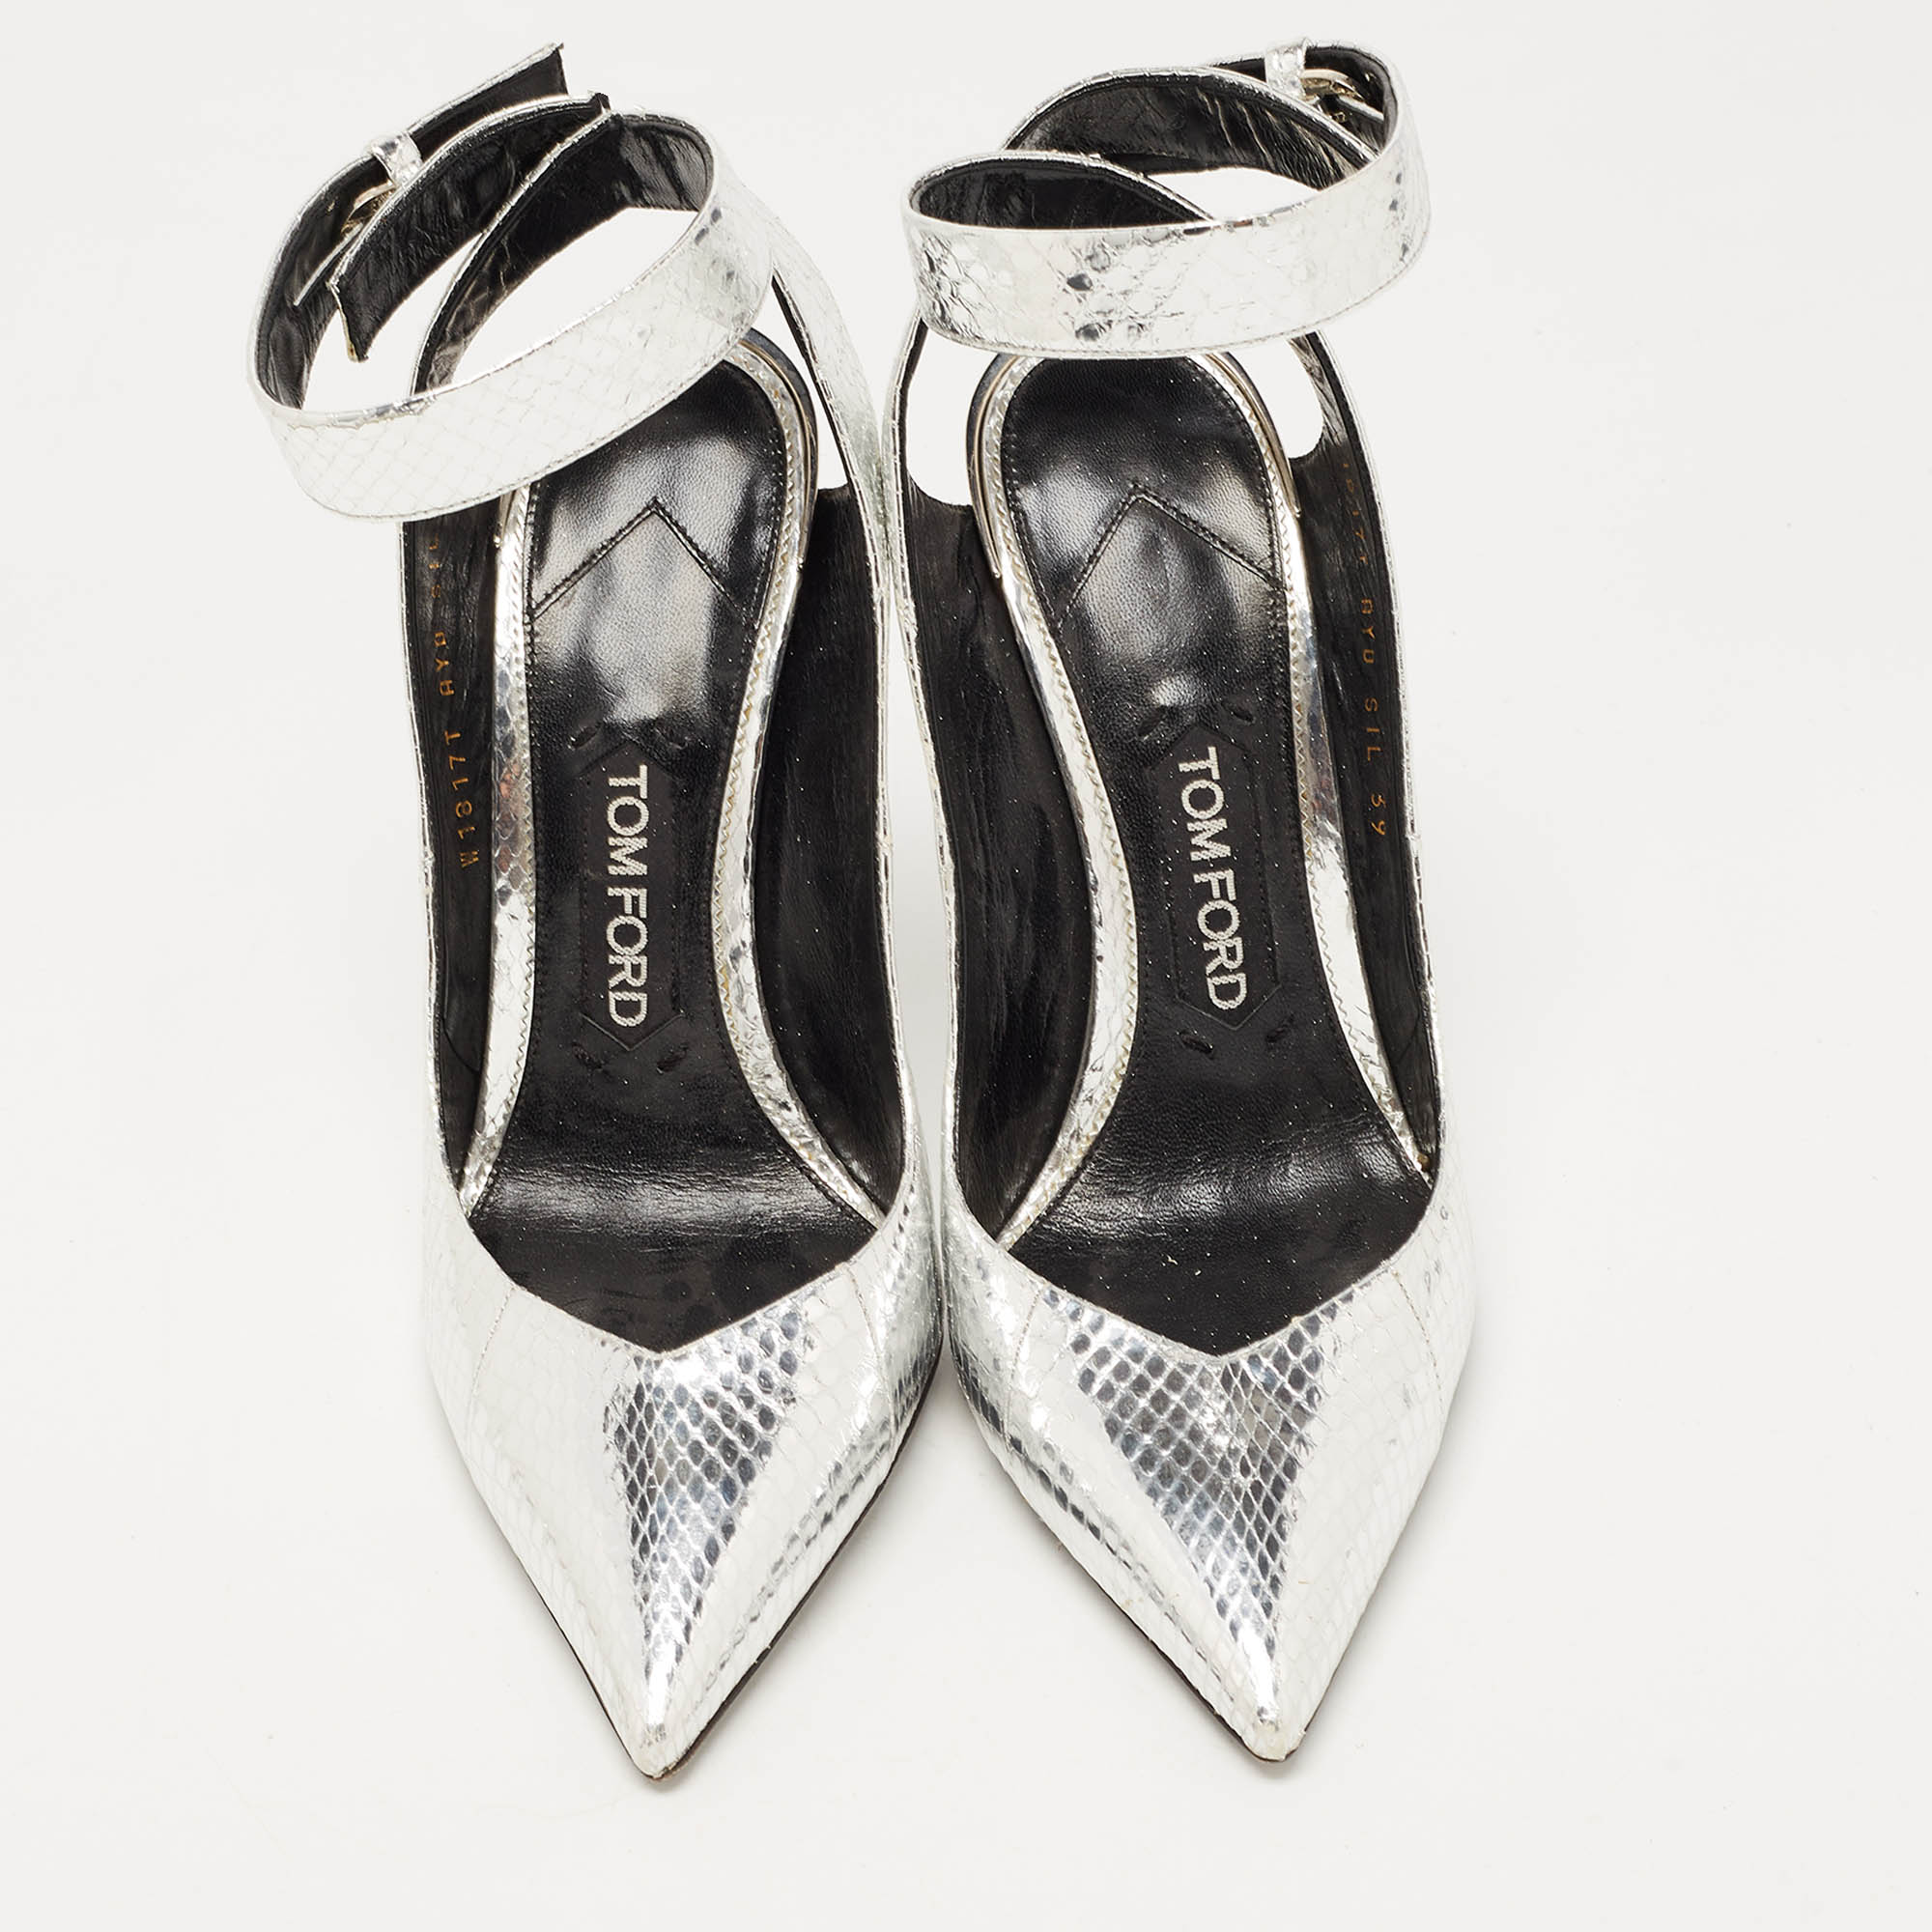 Tom Ford Silver Python Embossed Leather Ankle Strap Wedge Pumps Size 39